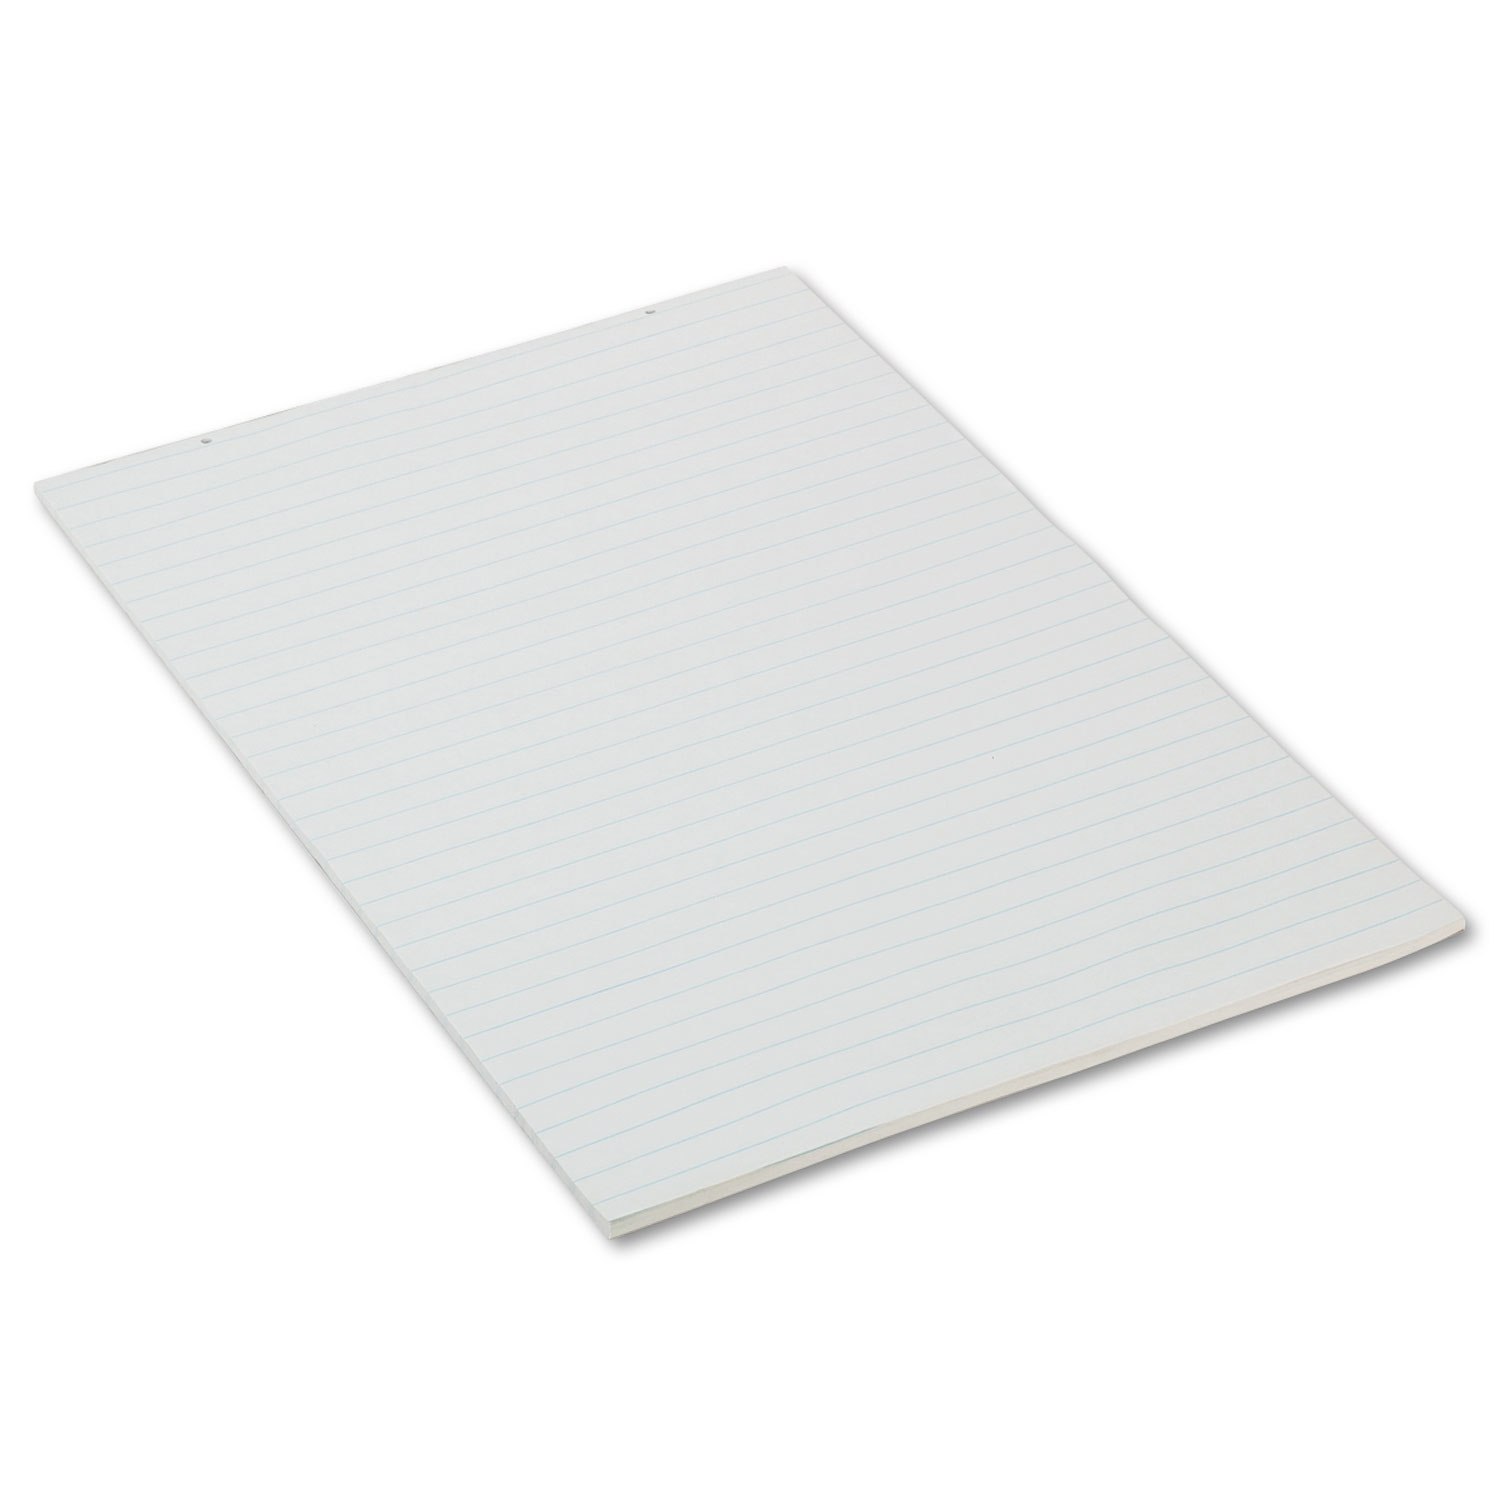  Pacon 3052 Primary Chart Pad, Presentation Rule, 24 x 36, 100 Sheets (PAC3052) 